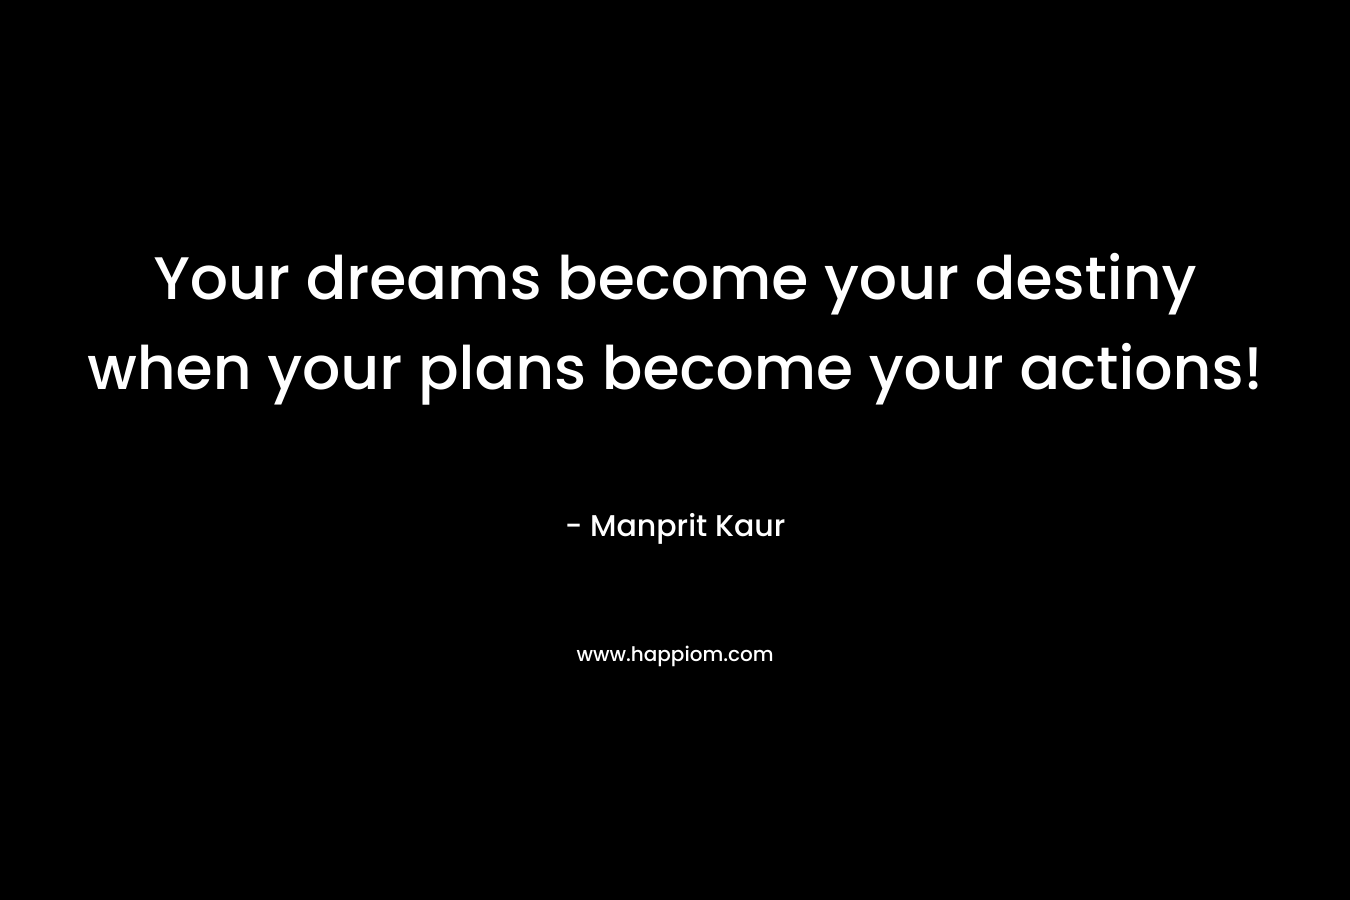 Your dreams become your destiny when your plans become your actions! – Manprit Kaur